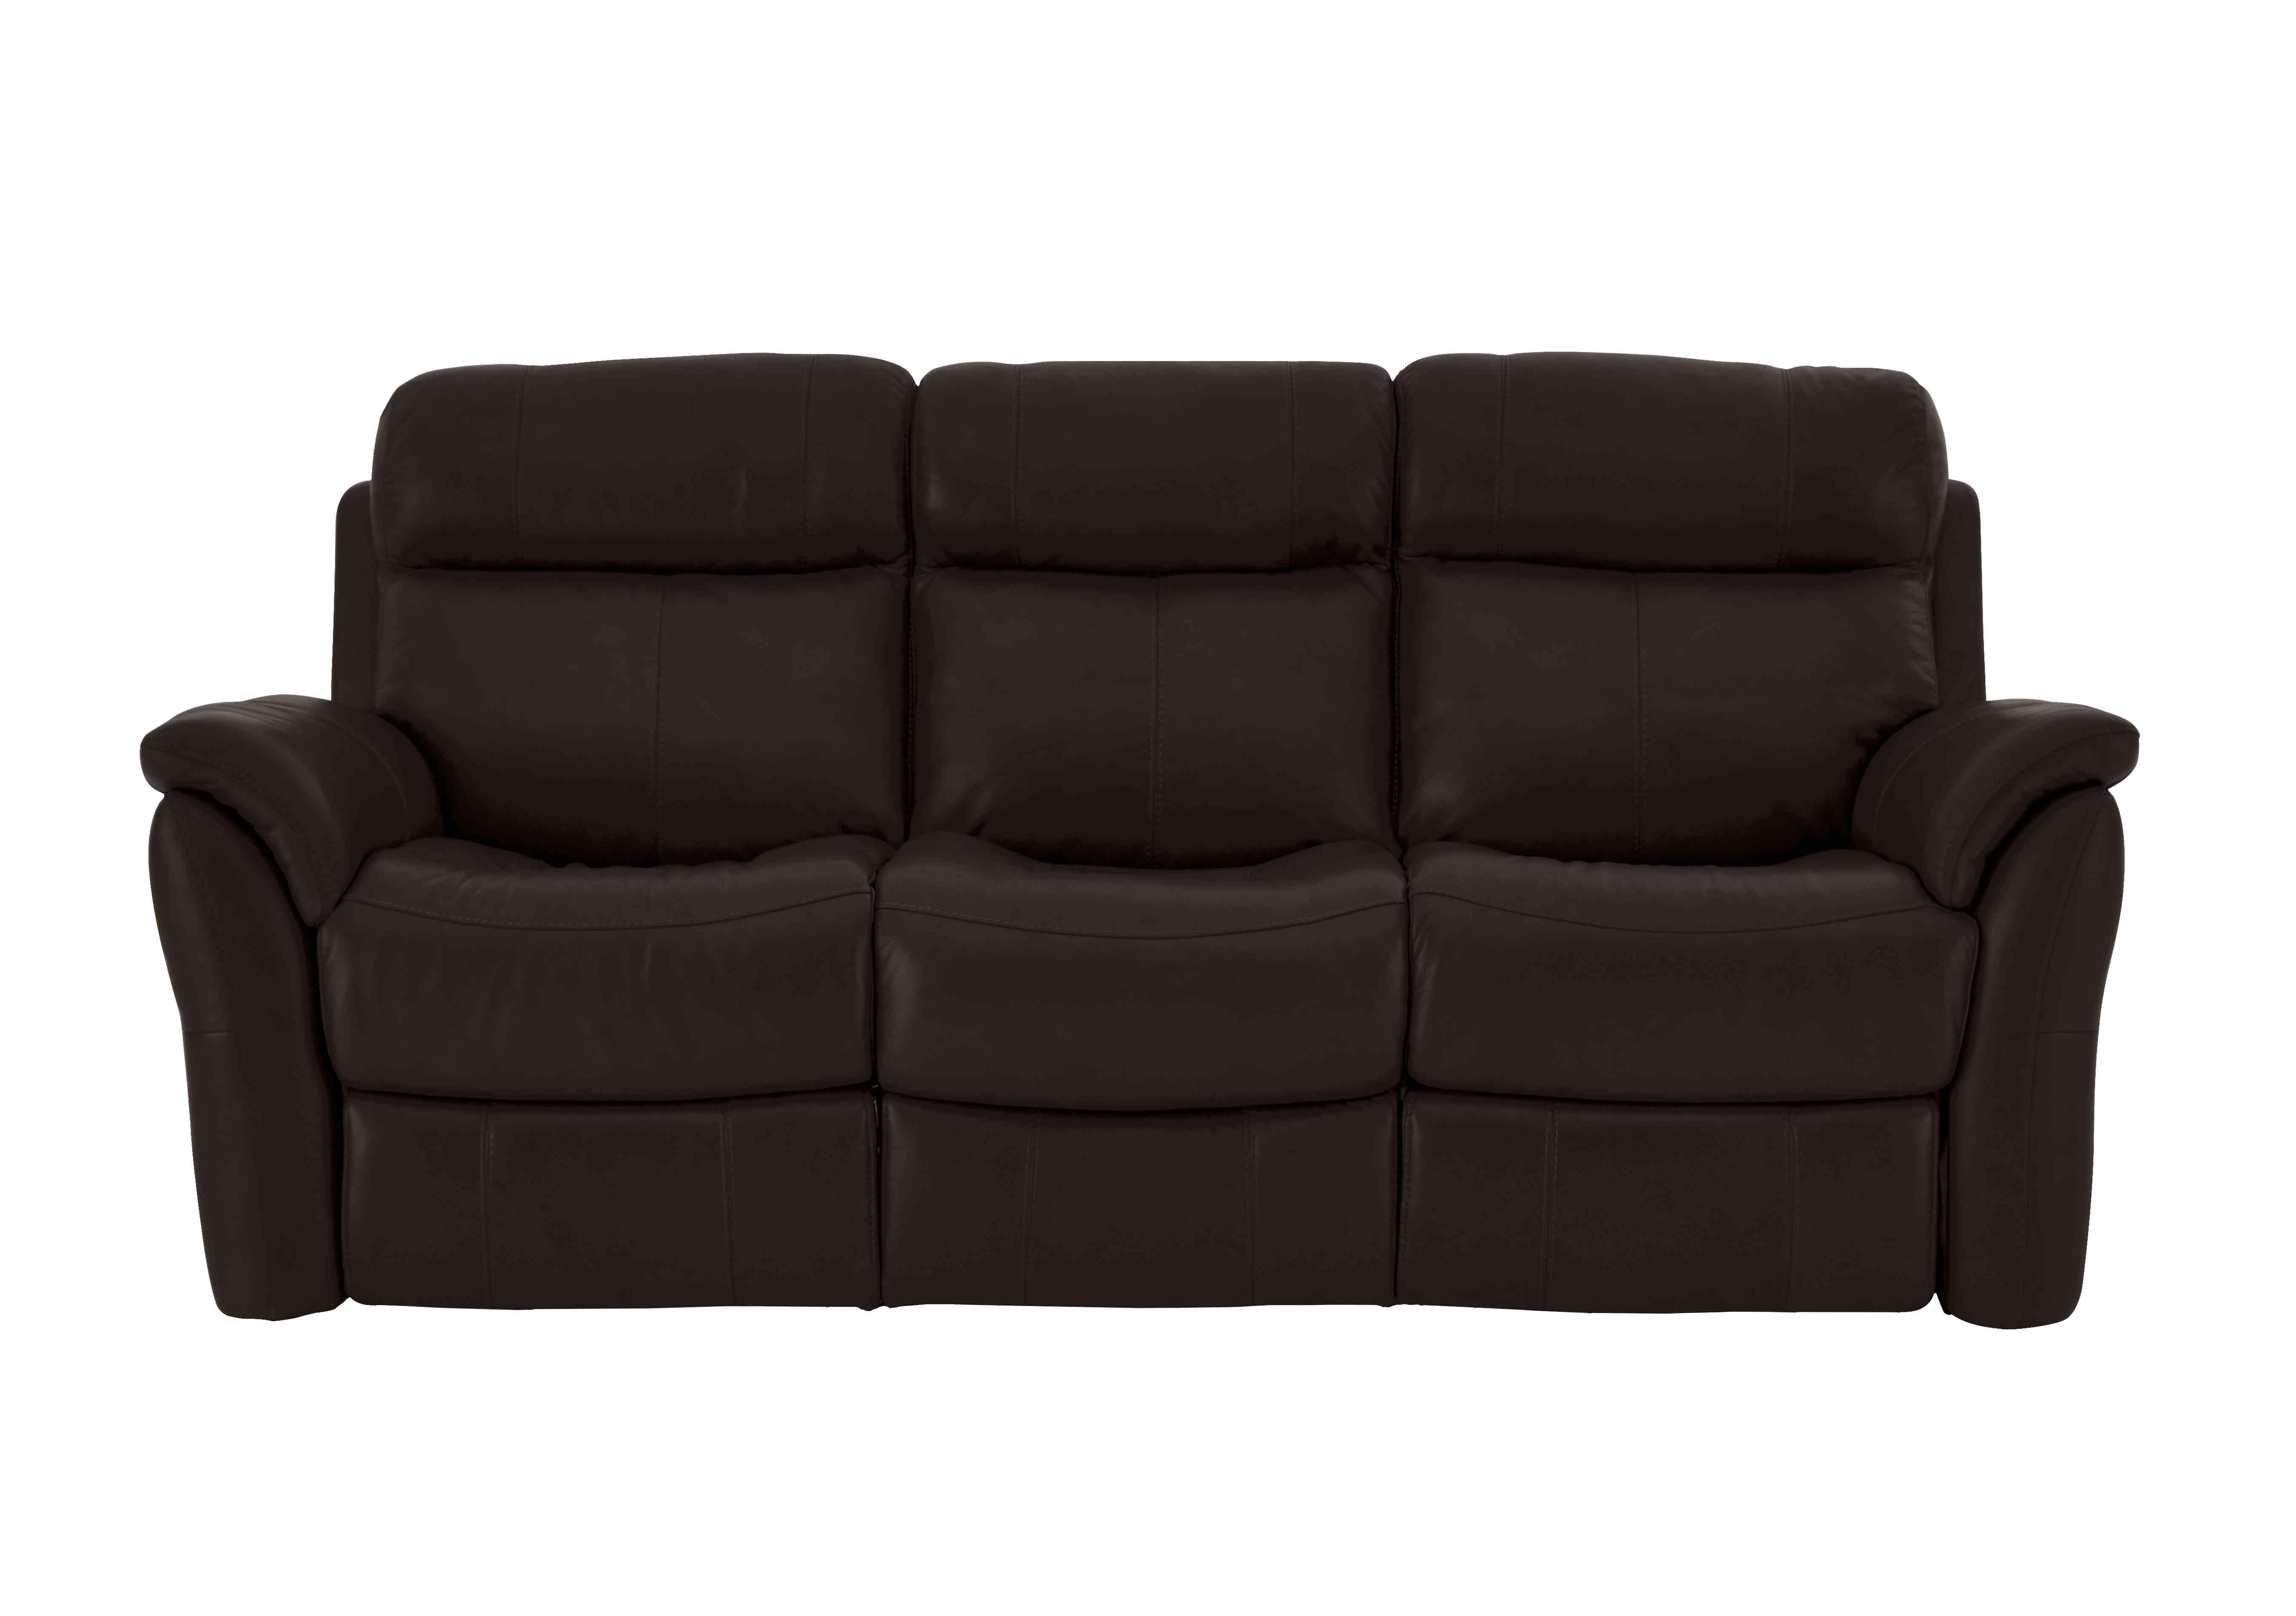 Relax Station Revive 3 Seater Leather Sofa in Bv-1748 Dark Chocolate on Furniture Village